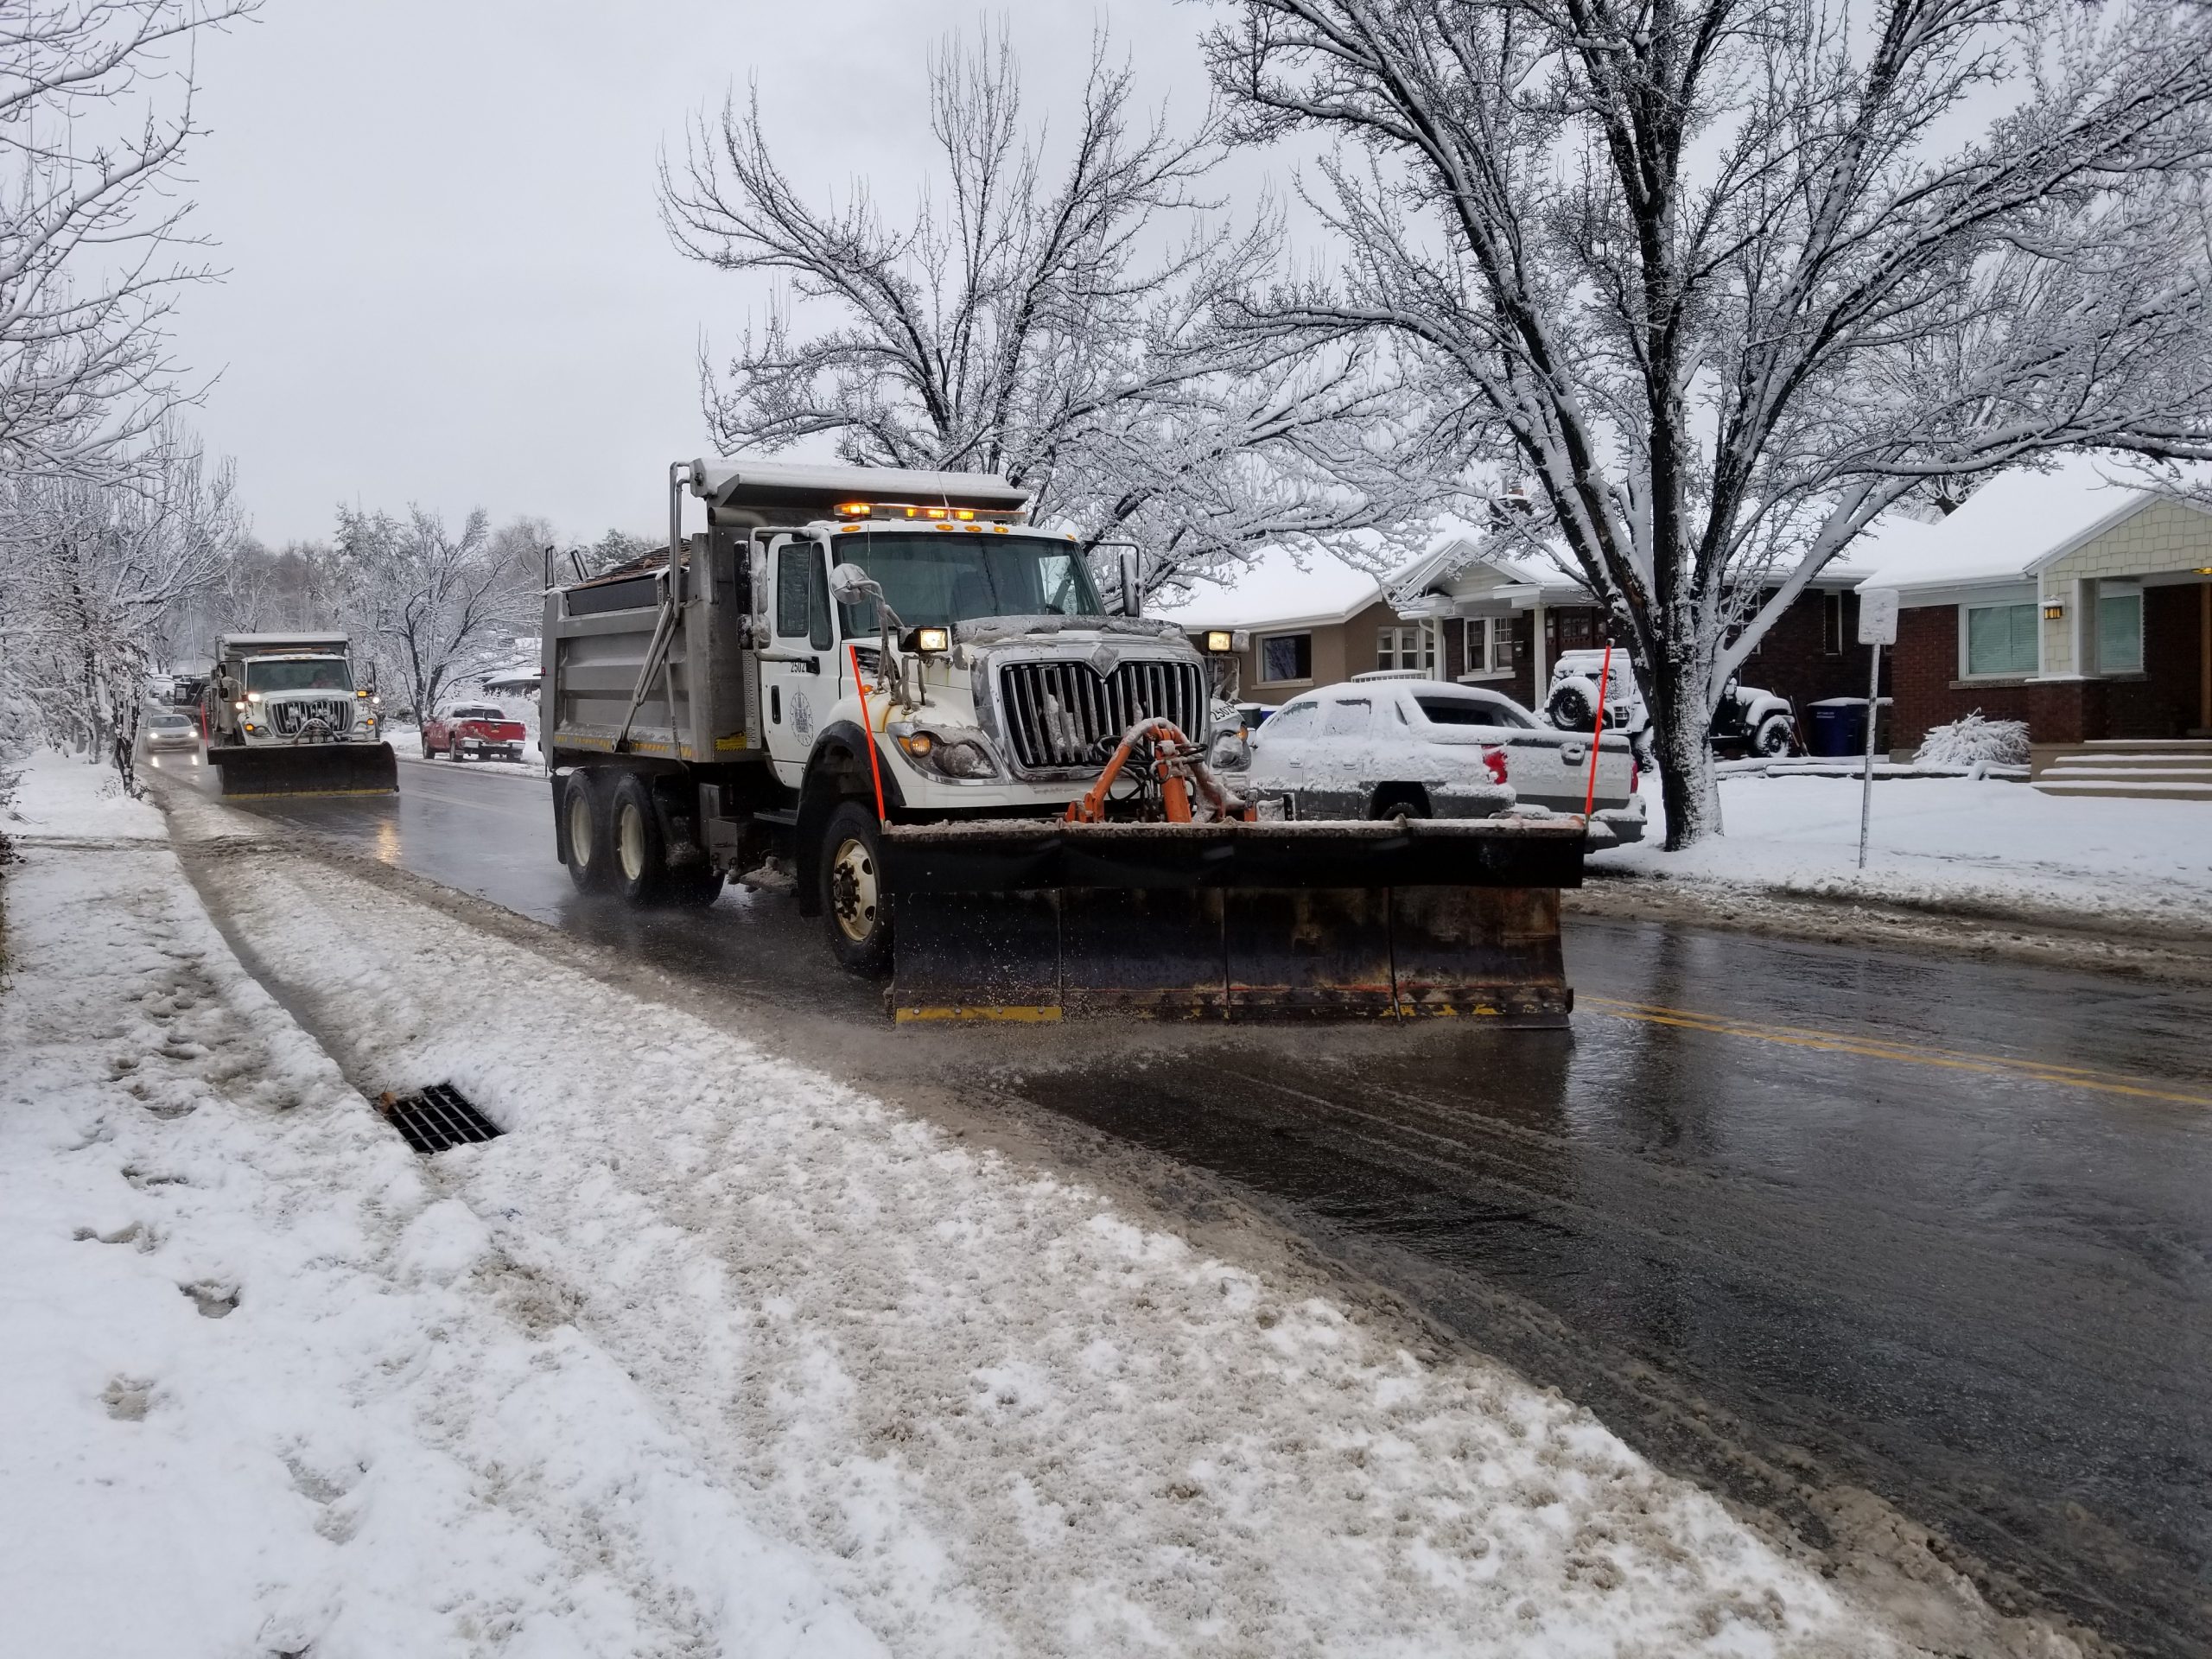 Snowplows clearing snow from roadway